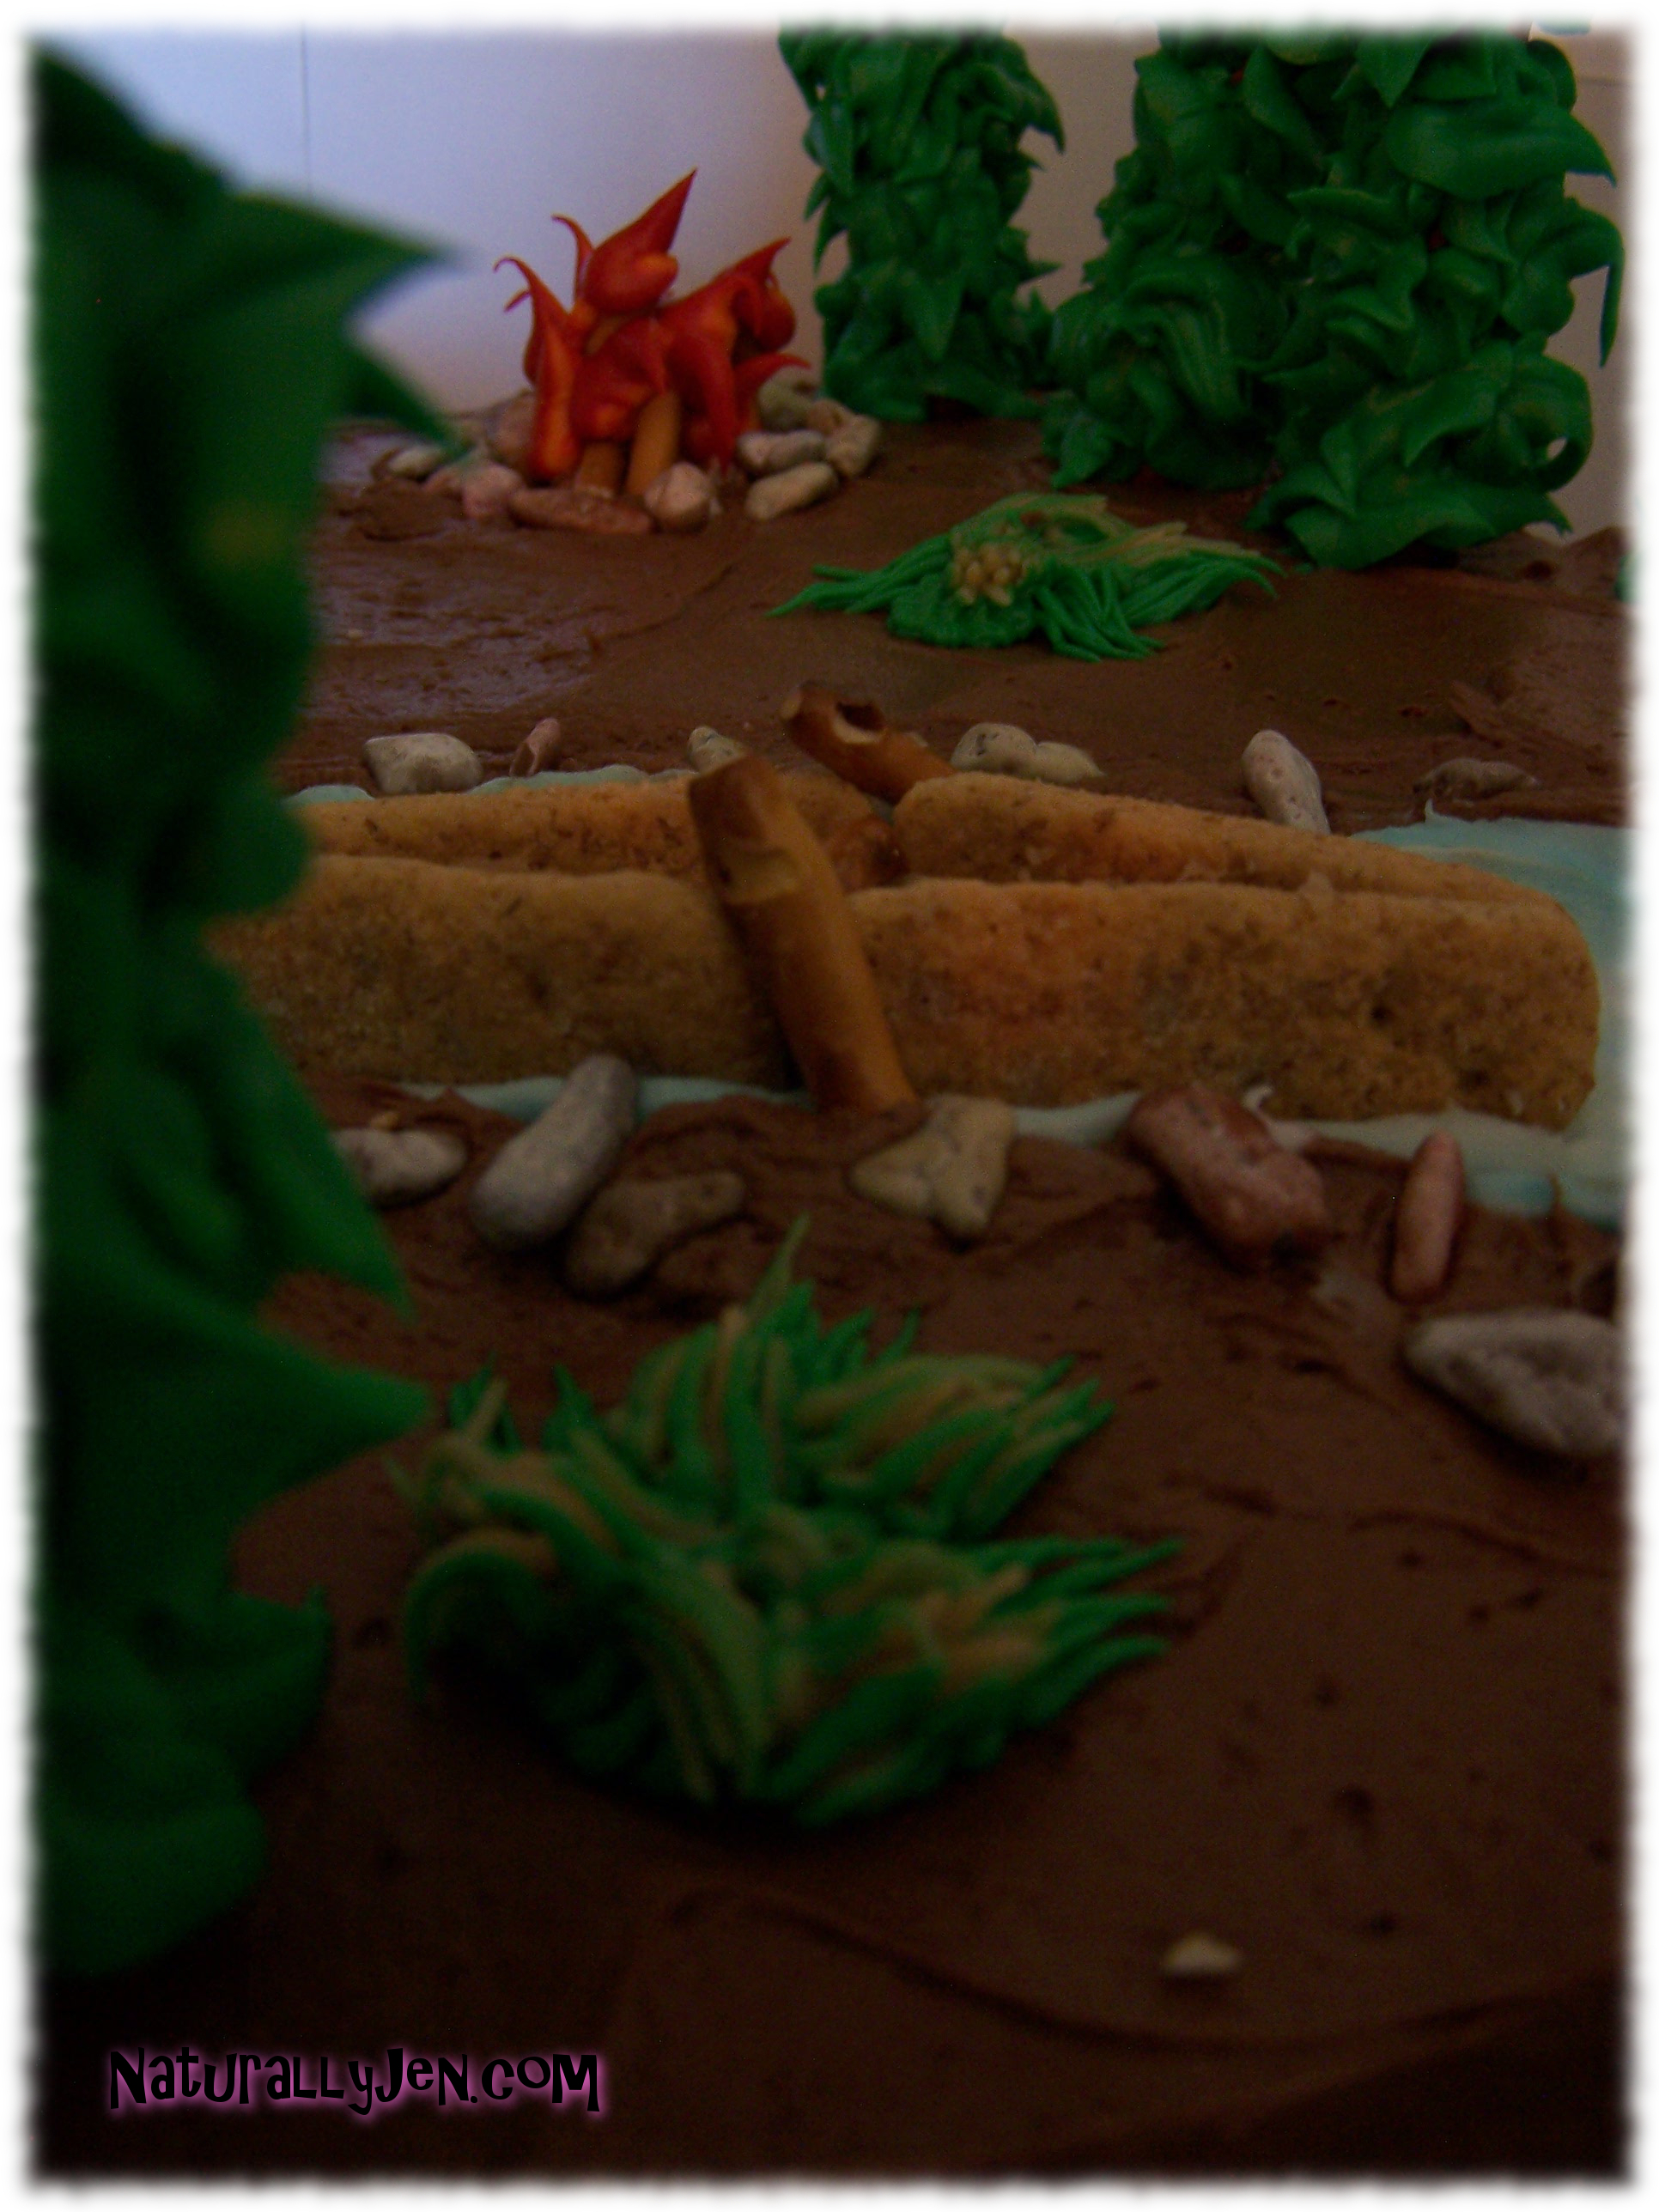 Themed Birthday Cakes with edible Canoe, Edible Fire and Edible Trees